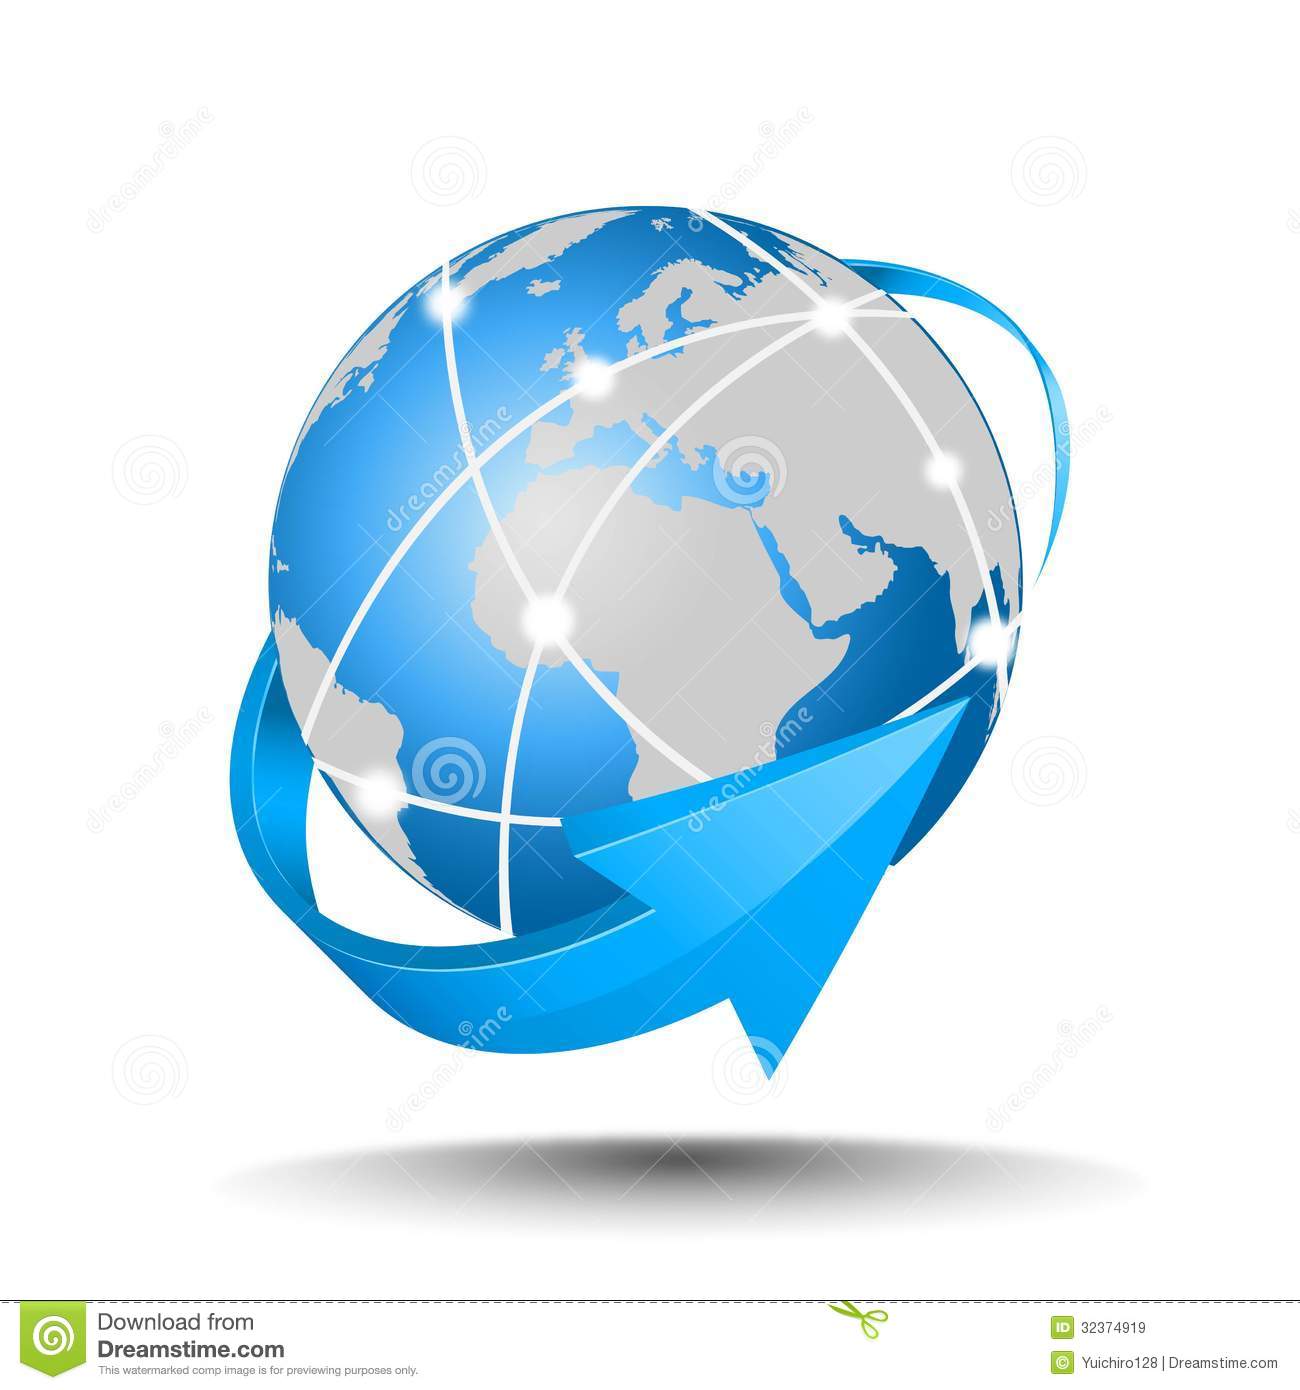 Internet Network Royalty Free Stock Images   Image  32374919